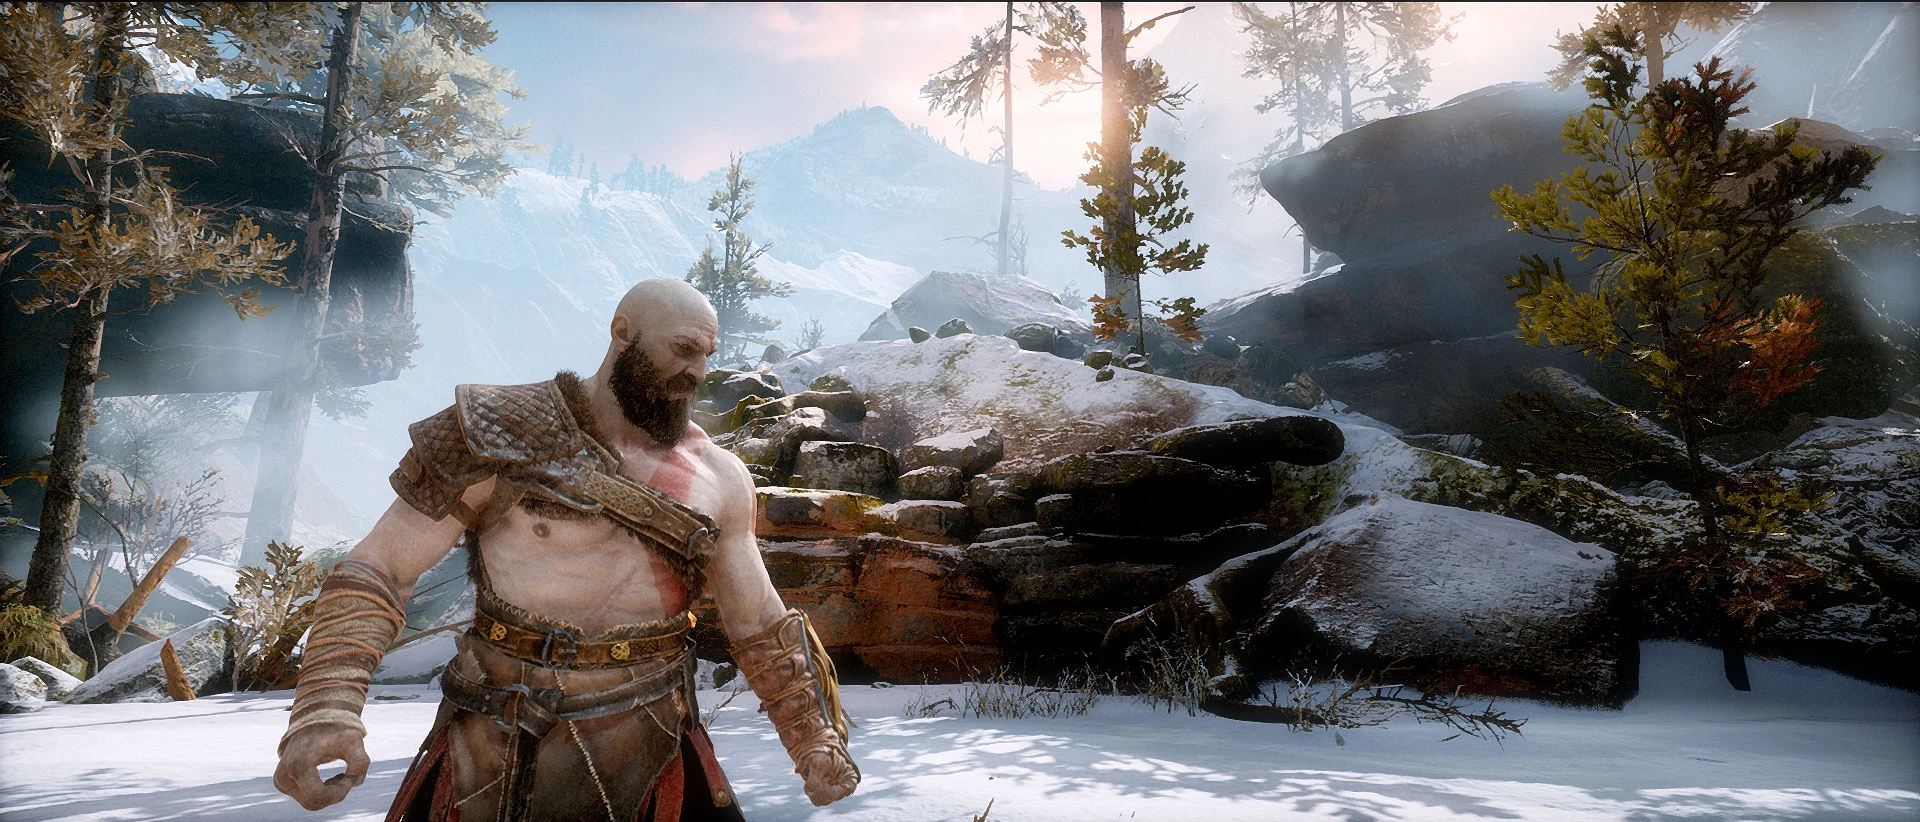 God Of War 2 being emulated in 4K + FXAA + Custom Shaders (Downscaled to  1080p with proper, non-stretched Widescreen) : r/pcmasterrace